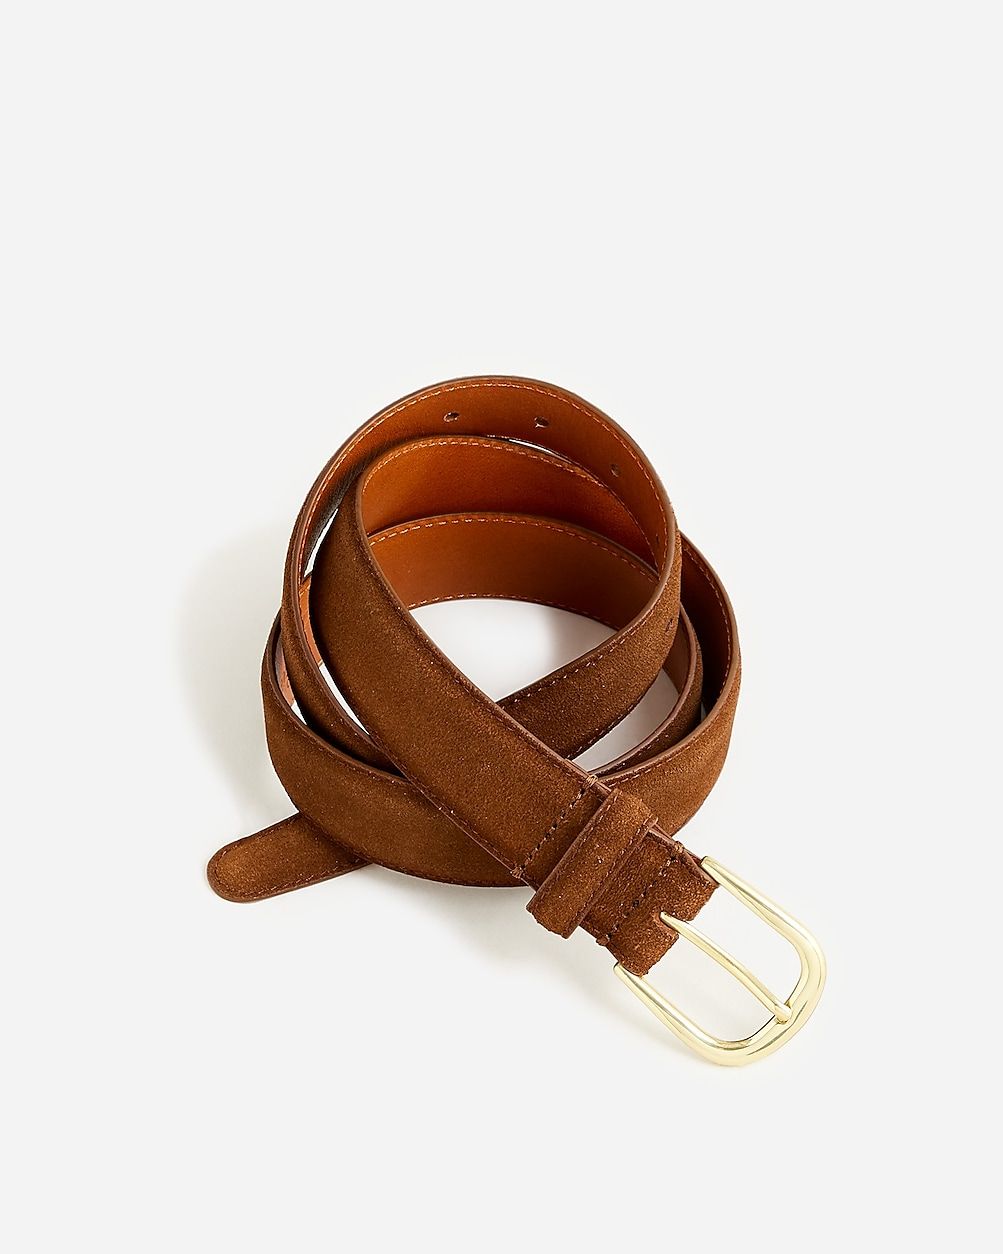 Italian suede and leather round-buckle dress belt | J.Crew US